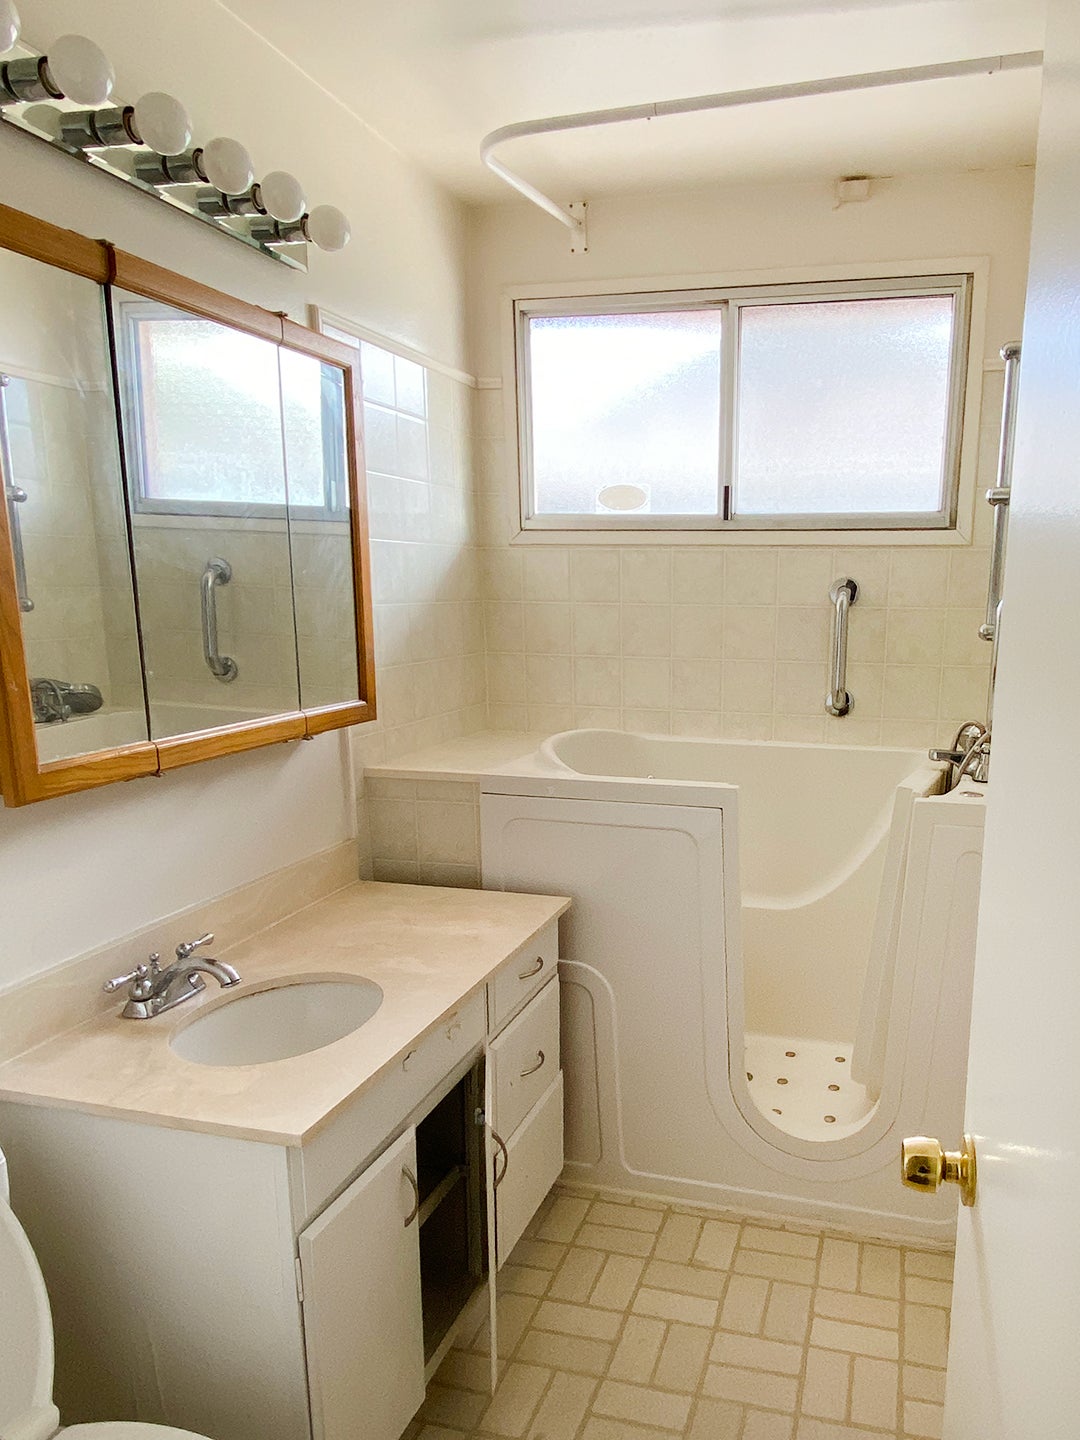 dated bathroom with large tub